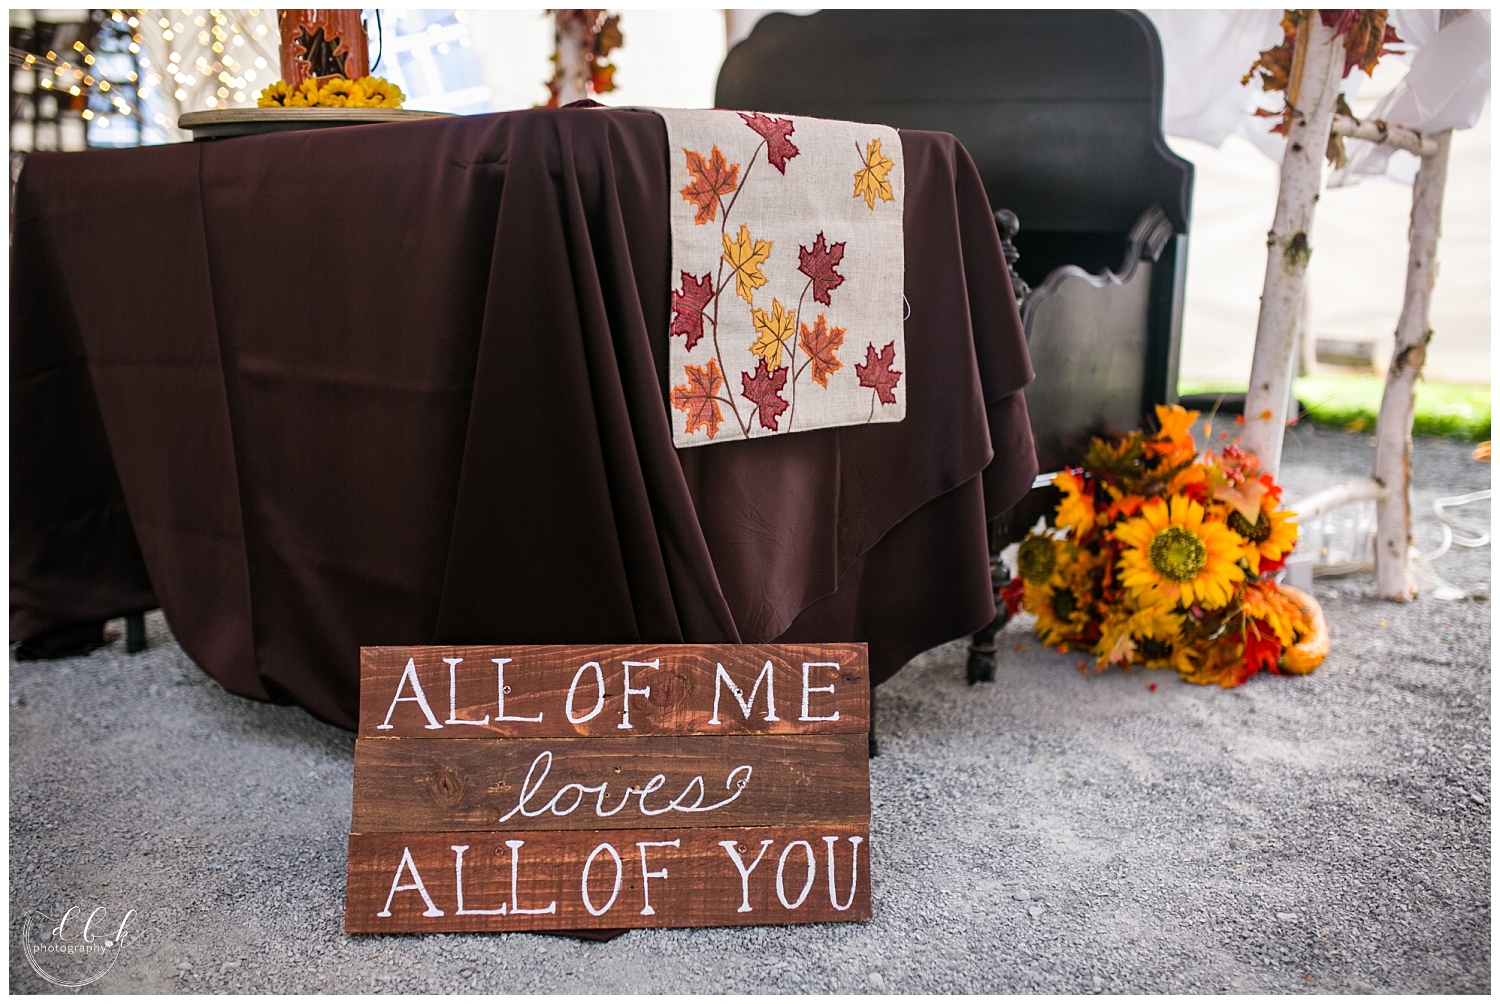 All of me loves all of you sign at Filigree Farm fall wedding